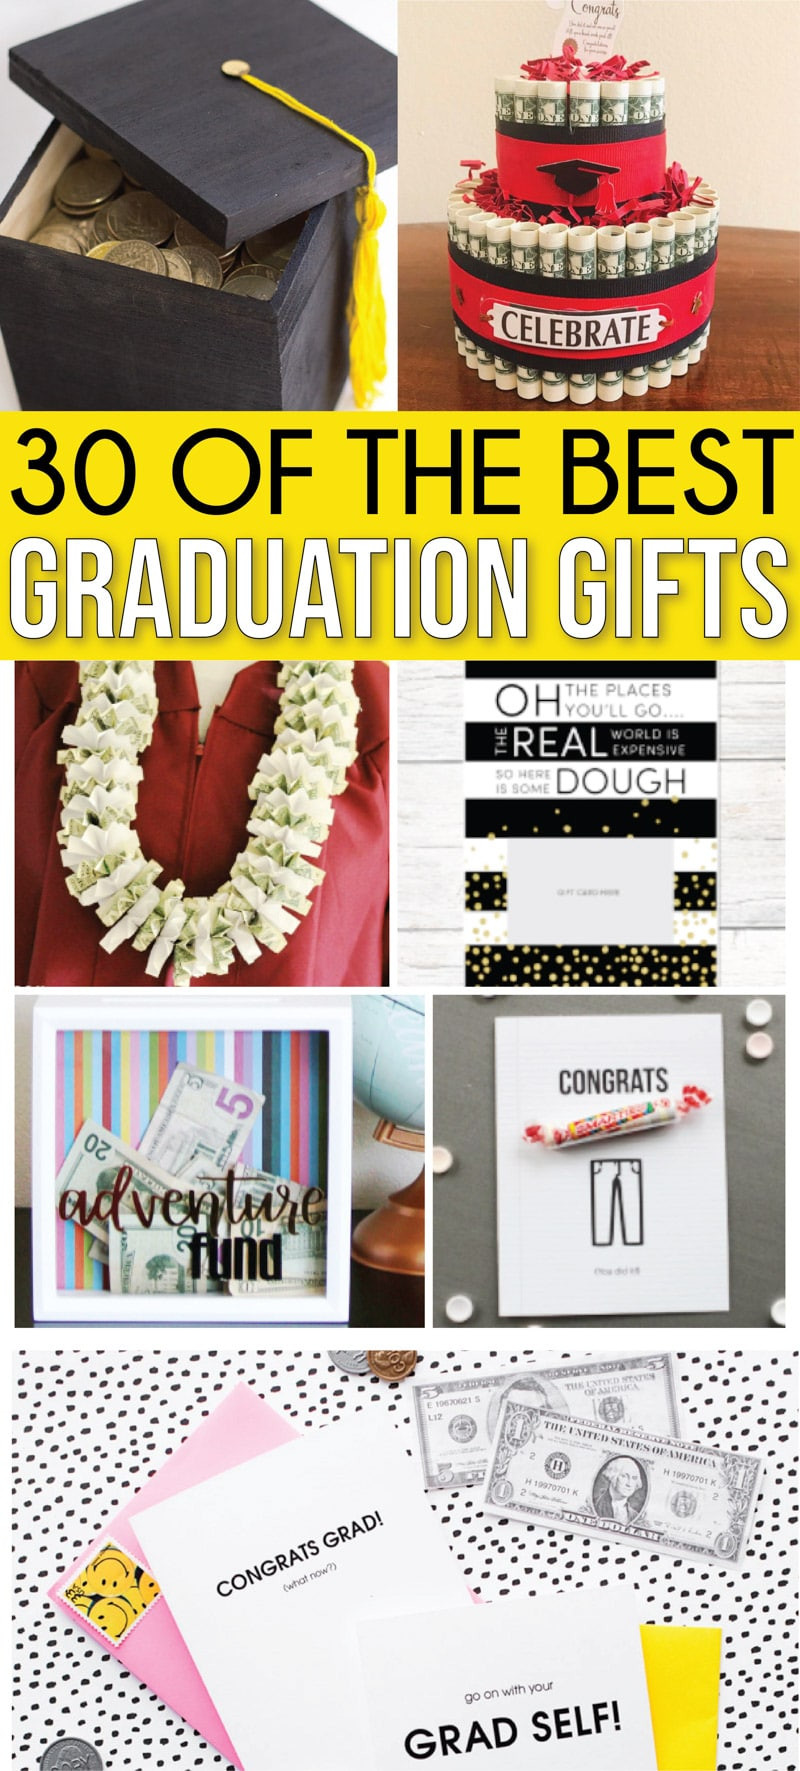 Graduation Gift Ideas For Male College Graduates
 30 Awesome High School Graduation Gifts Graduates Actually